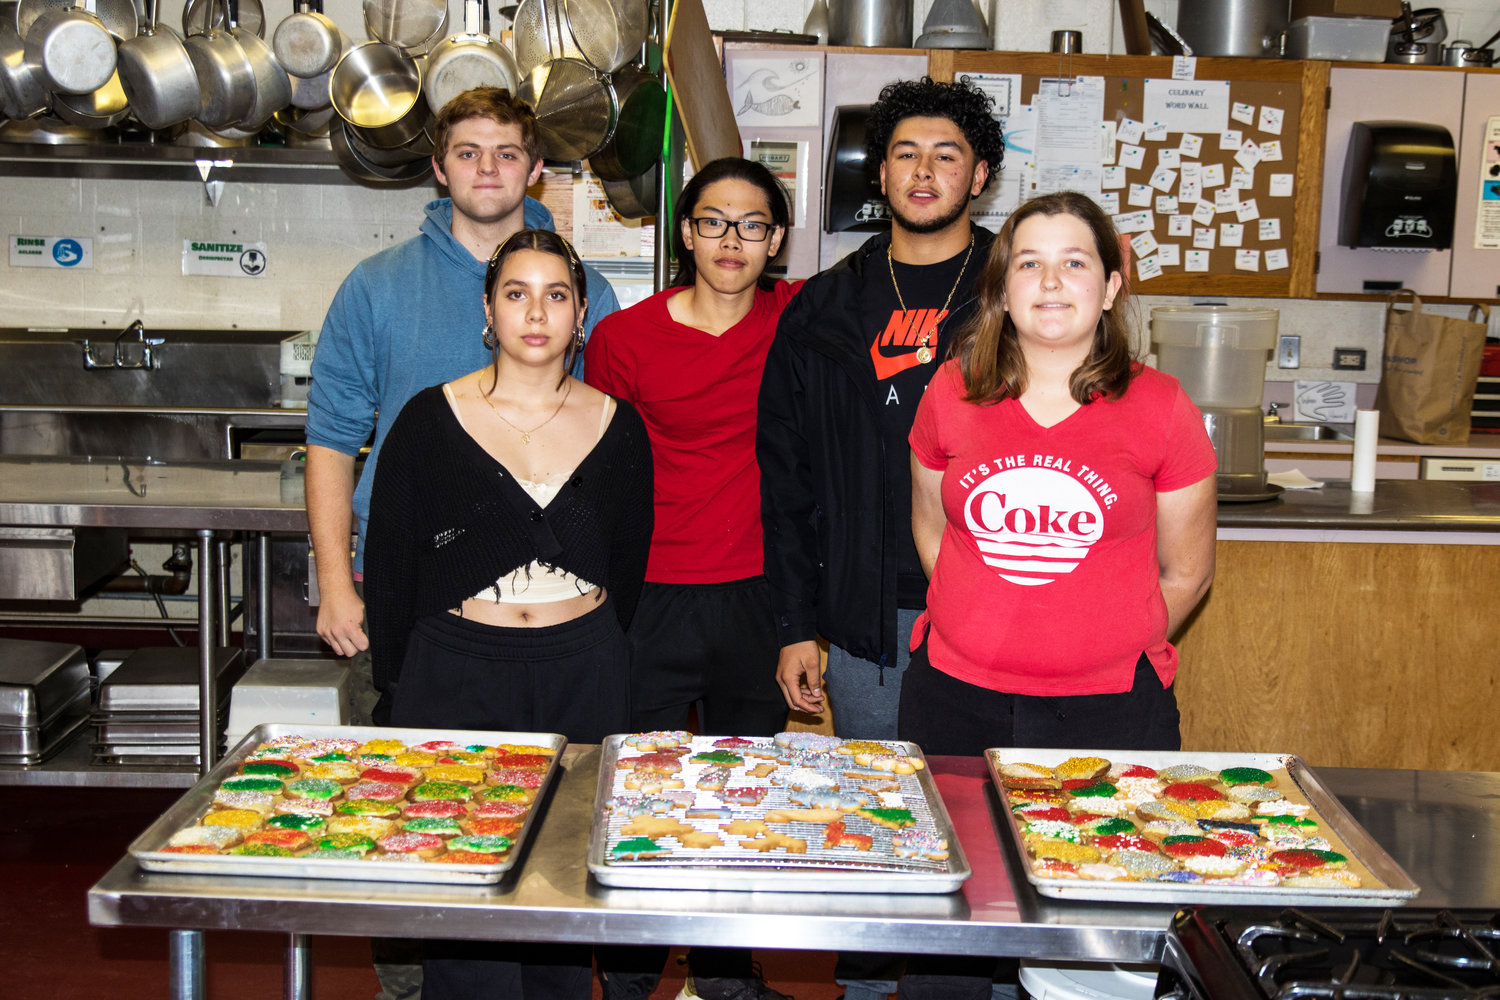 Evan Keeler, Sofia Deras, Suppanant On-in, Jose Partida and Abigail Borneman infront of the holiday cookies that they baked in Tom Proch's culinary class.